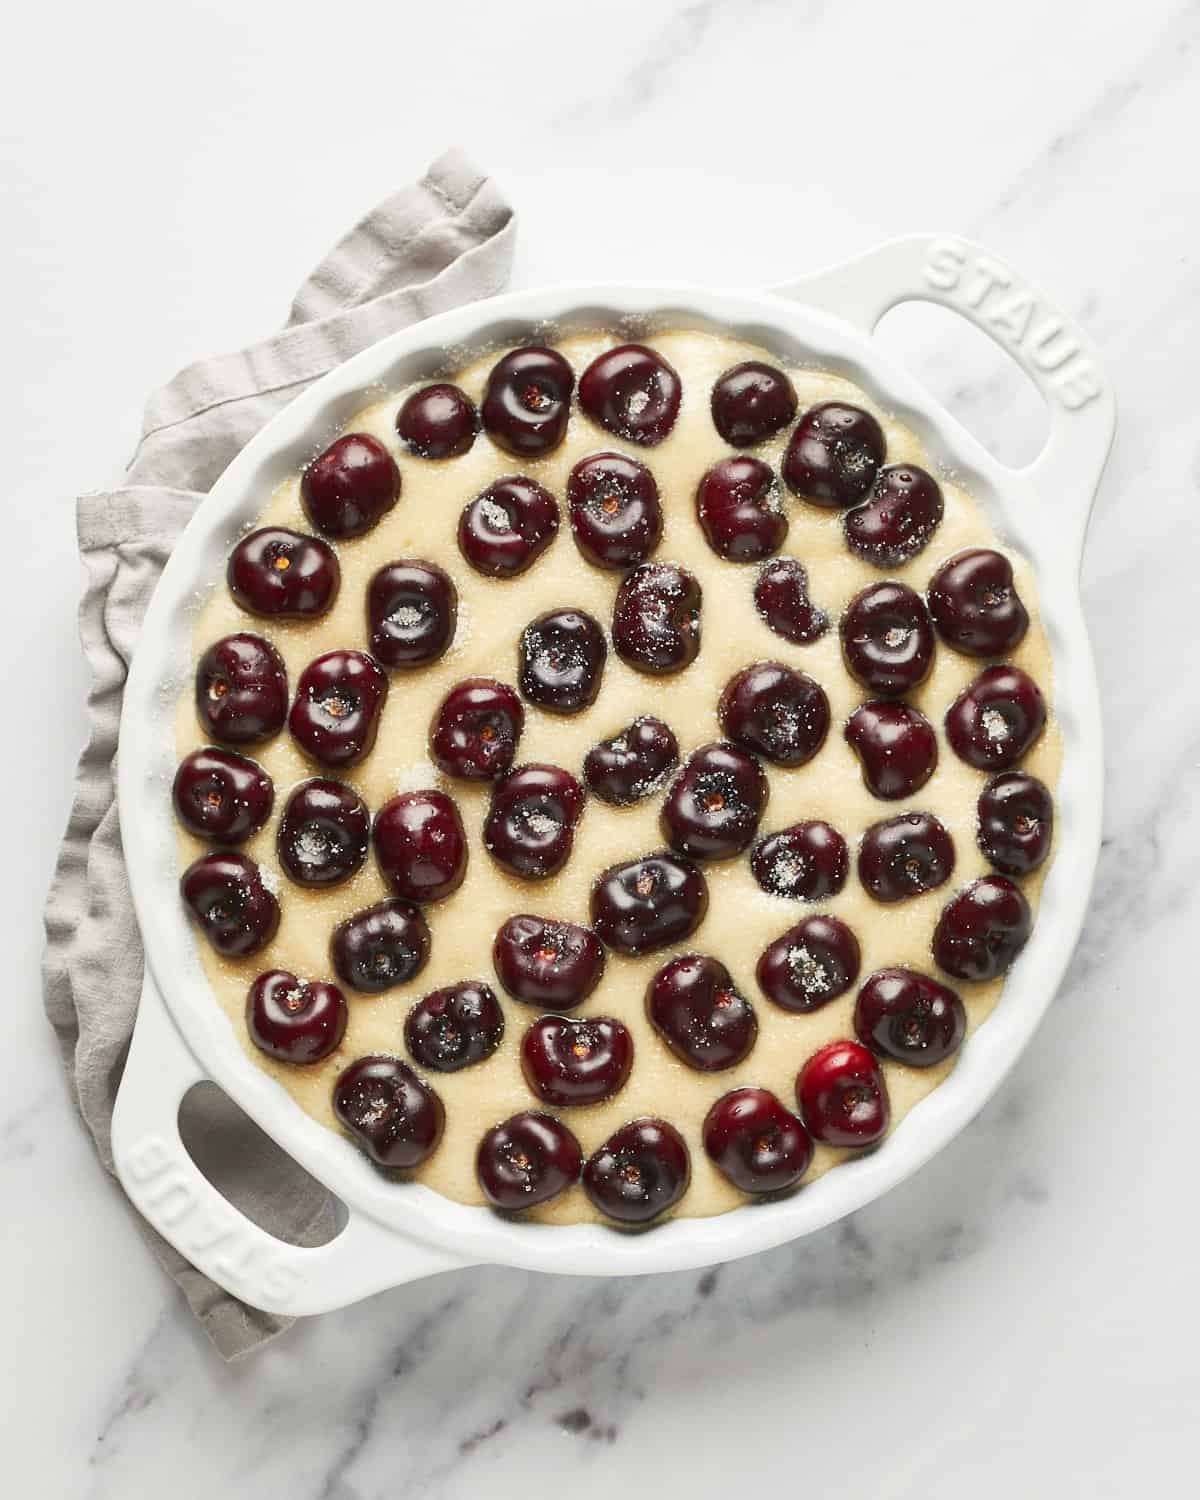 Overhead view of batter in a baking dish with fresh sweet cherries and sugar sprinkled on top.